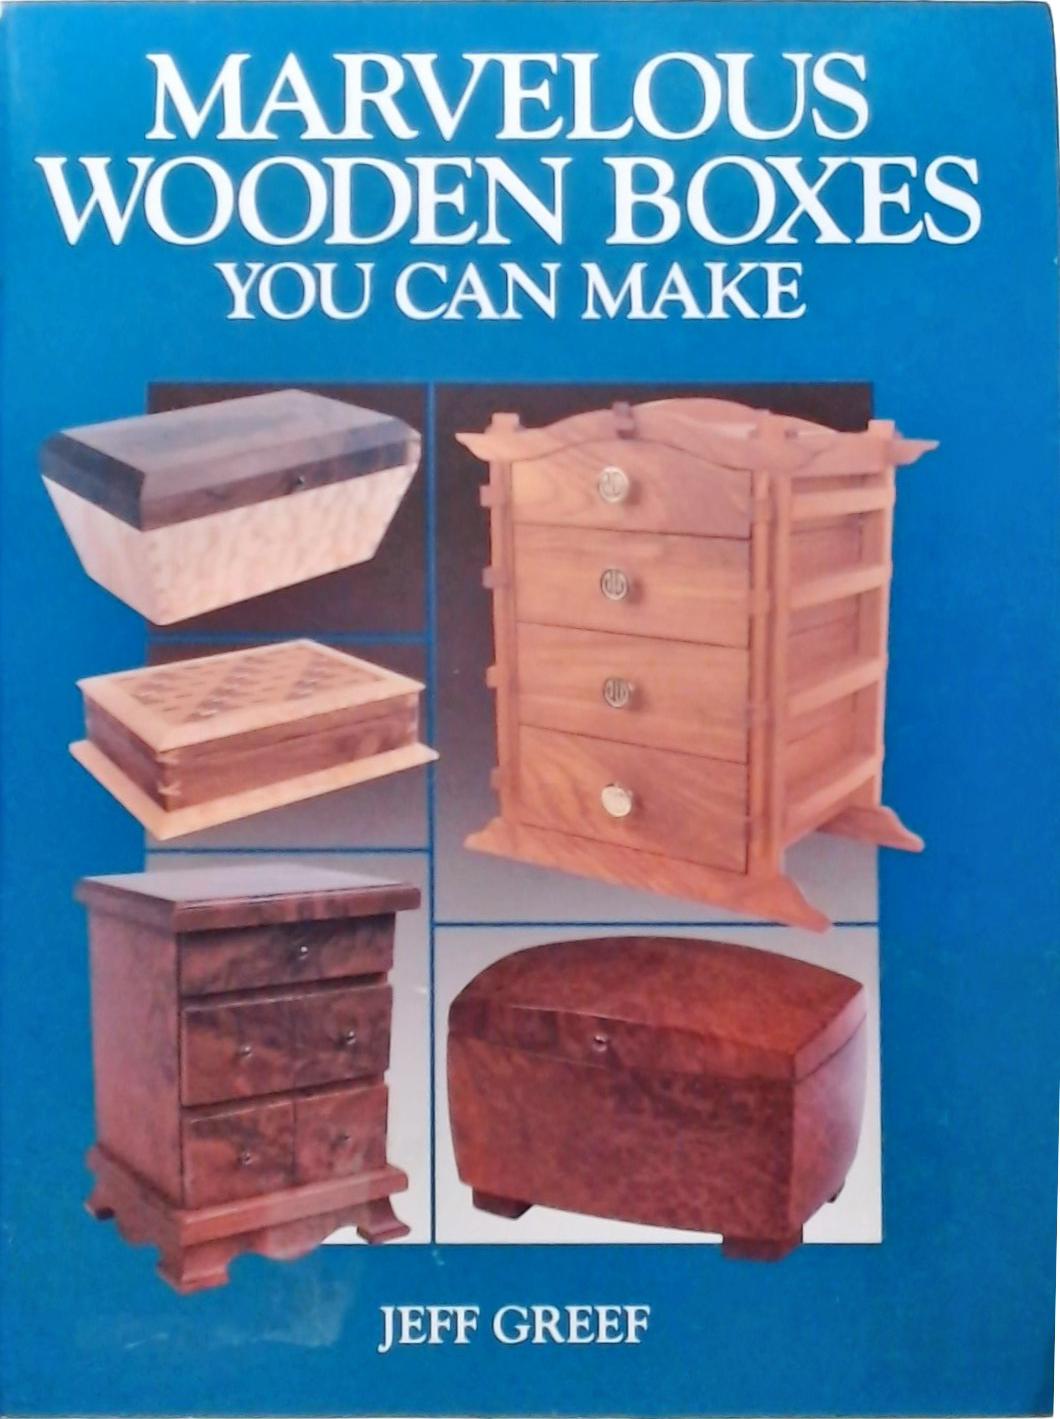 Marvelous Wooden Boxes You Can Make